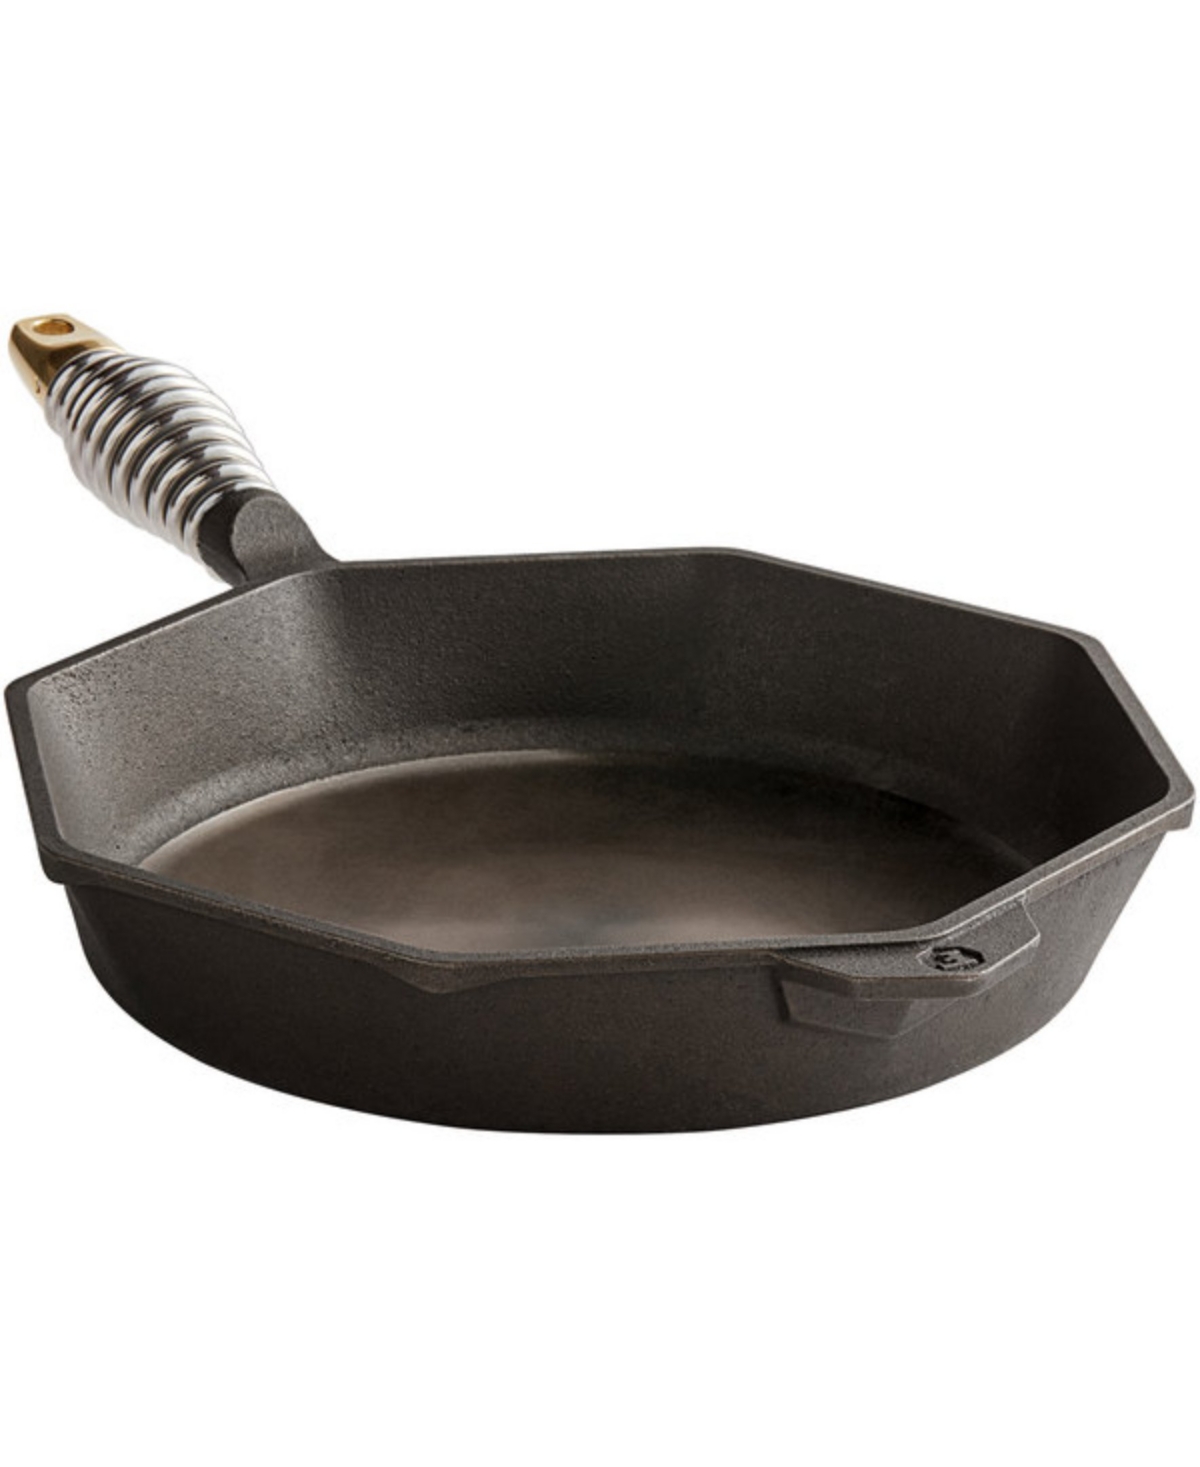 Lodge Cast Iron Finex 12" Skillet Cookware In Black